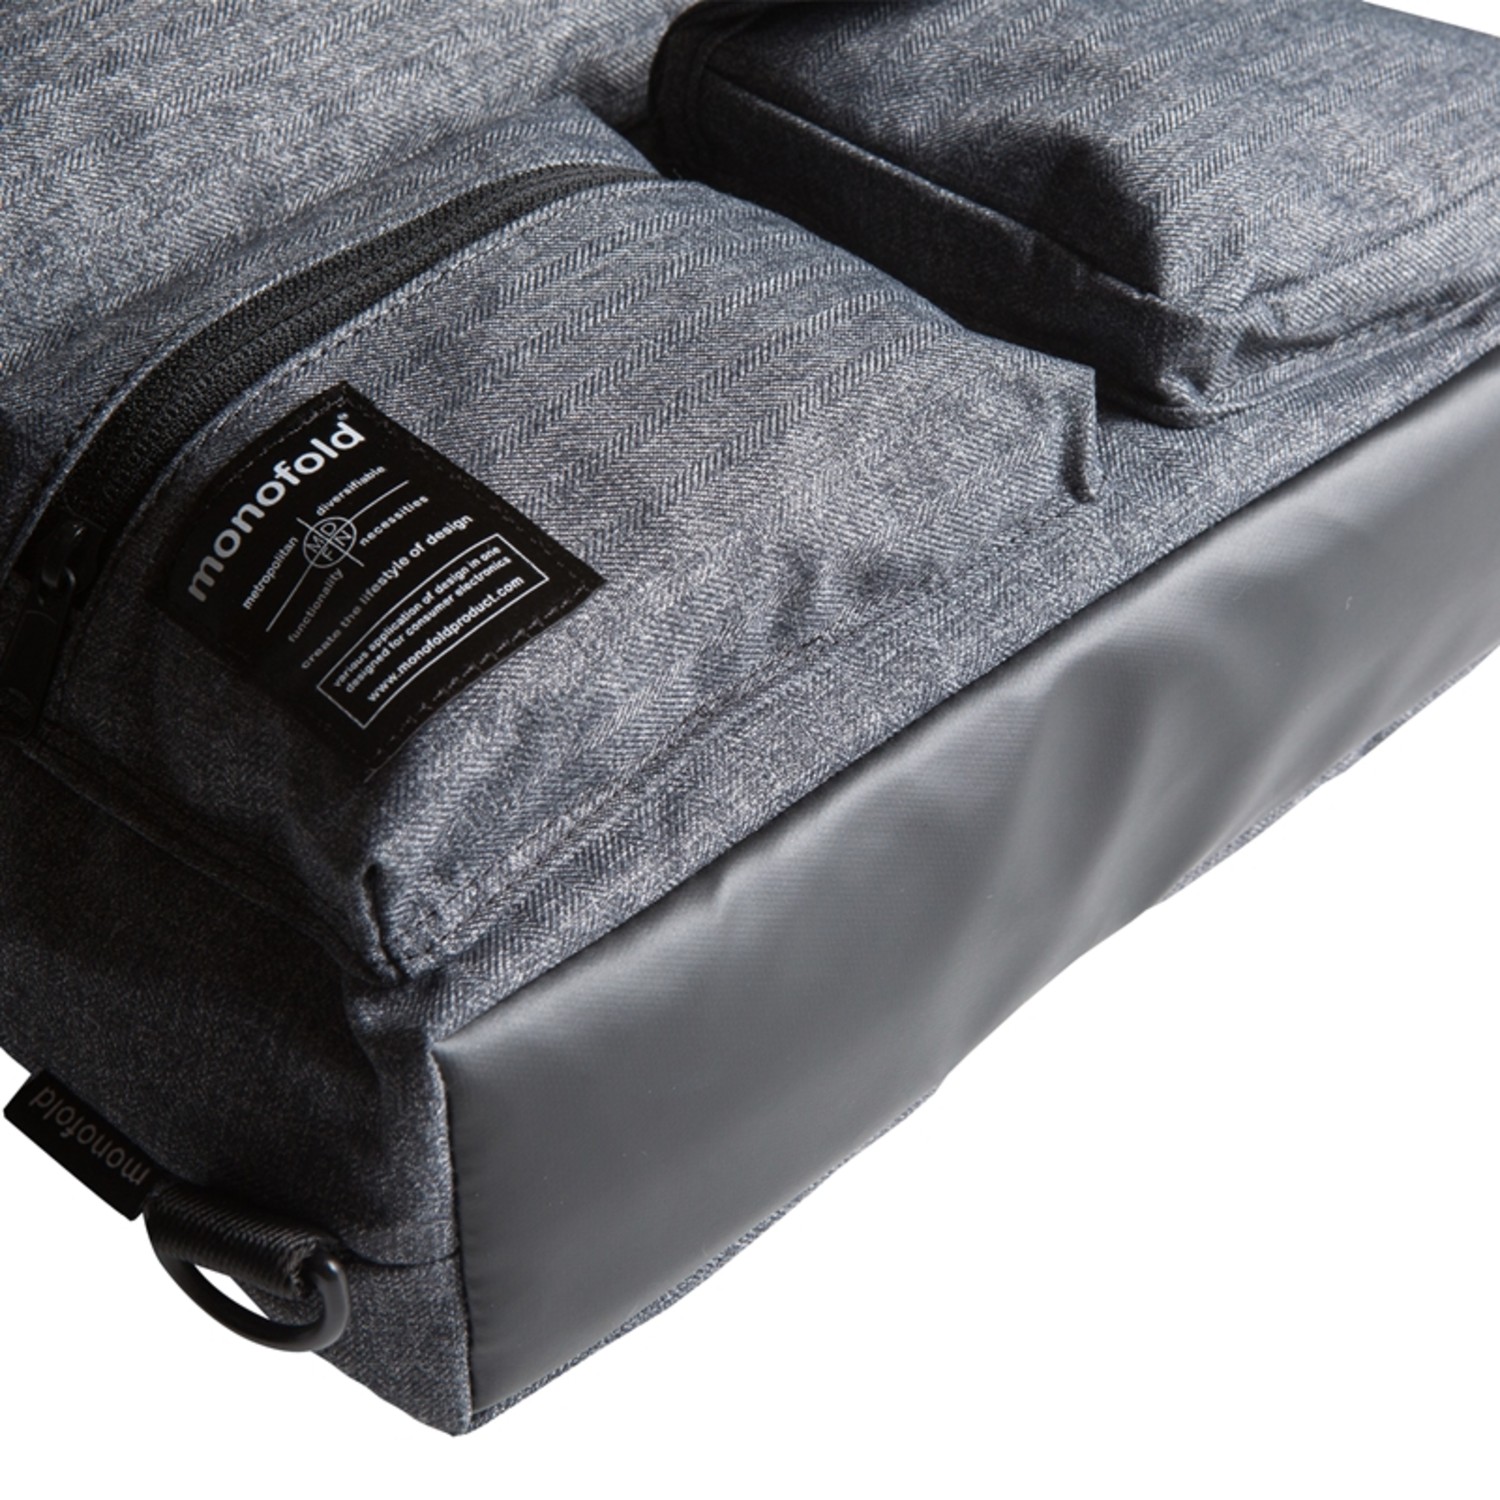 NEO Carry Bag (Black) - Monofold Bags - Touch of Modern